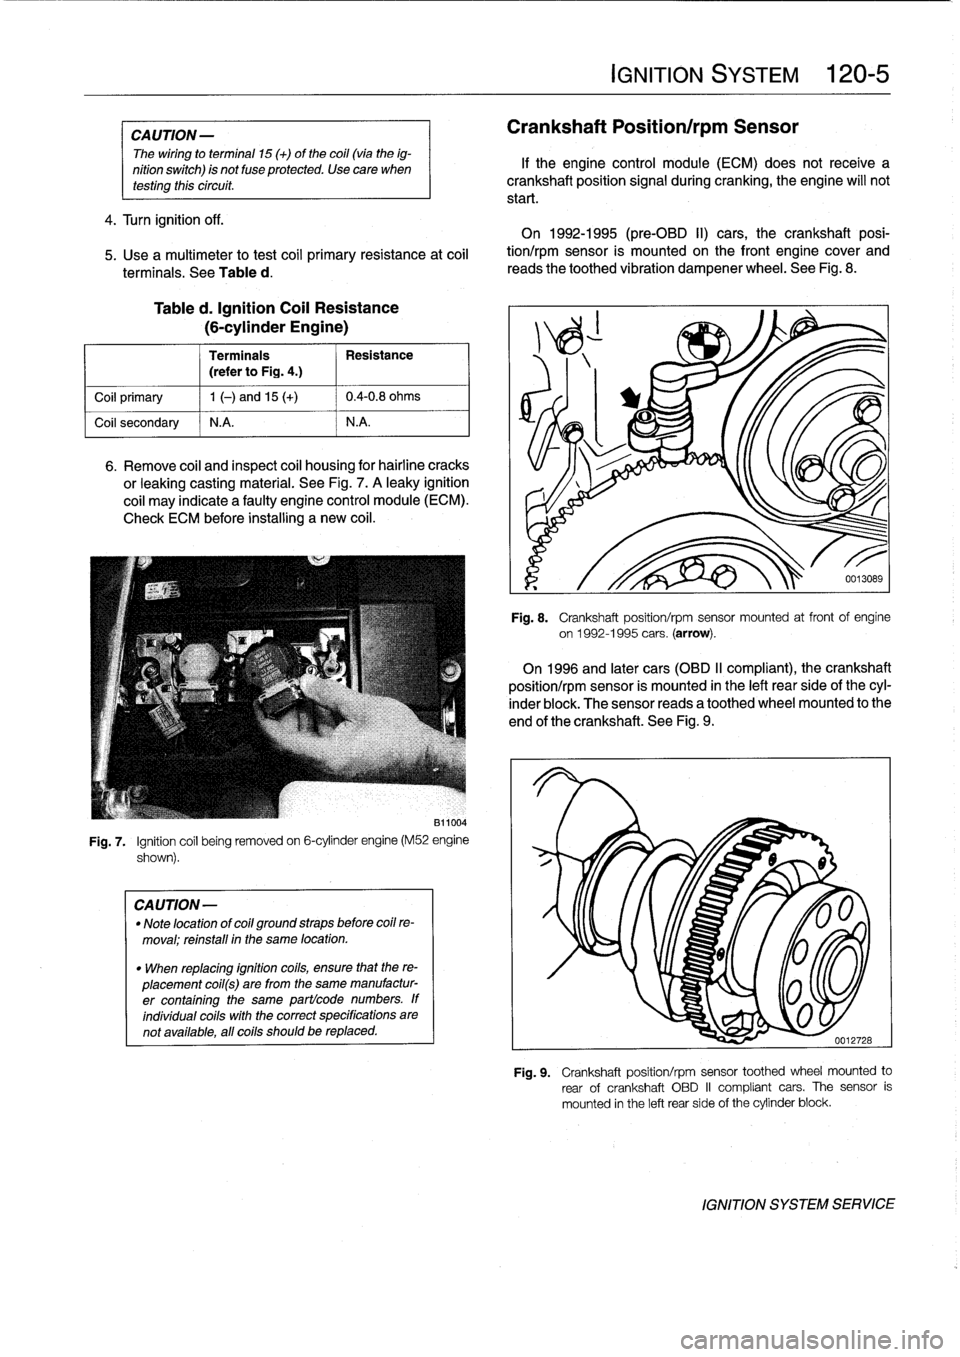 BMW 318i 1995 E36 Workshop Manual 
CAUTION
-

The
wiring
to
termina¡
15
(+)
of
the
coil(vía
the
ig-

nition
switch)
is
not
fuse
protected
.
Use
care
when
testíng
thiscircuit
.

4
.
Turn
ignition
off
.

5
.
Use
a
multimeter
to
test
